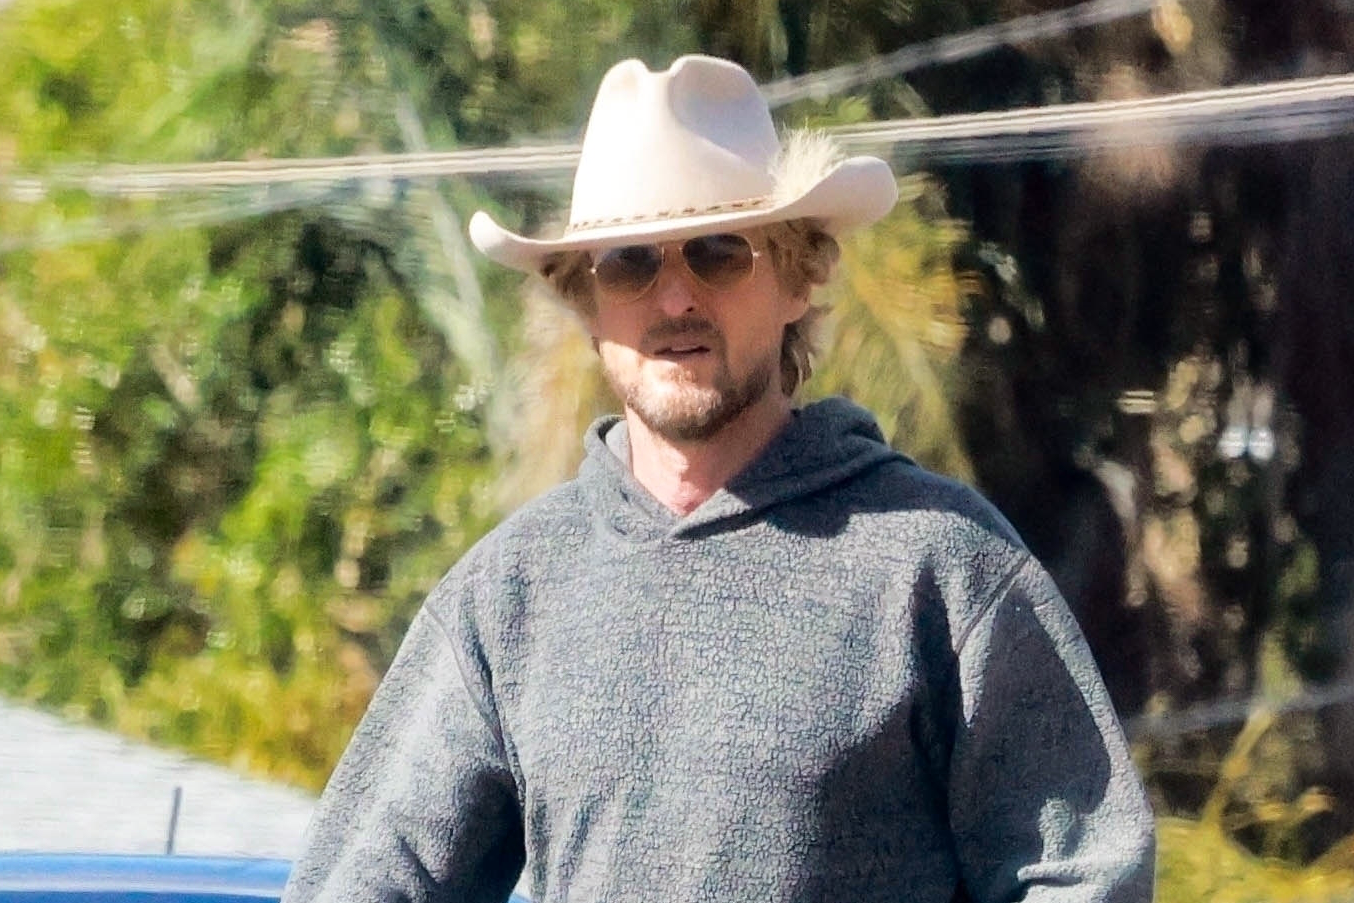 Owen Wilson seen wearing a white cowboy hat with feather & grey sweatsuit with Nike running sneakers